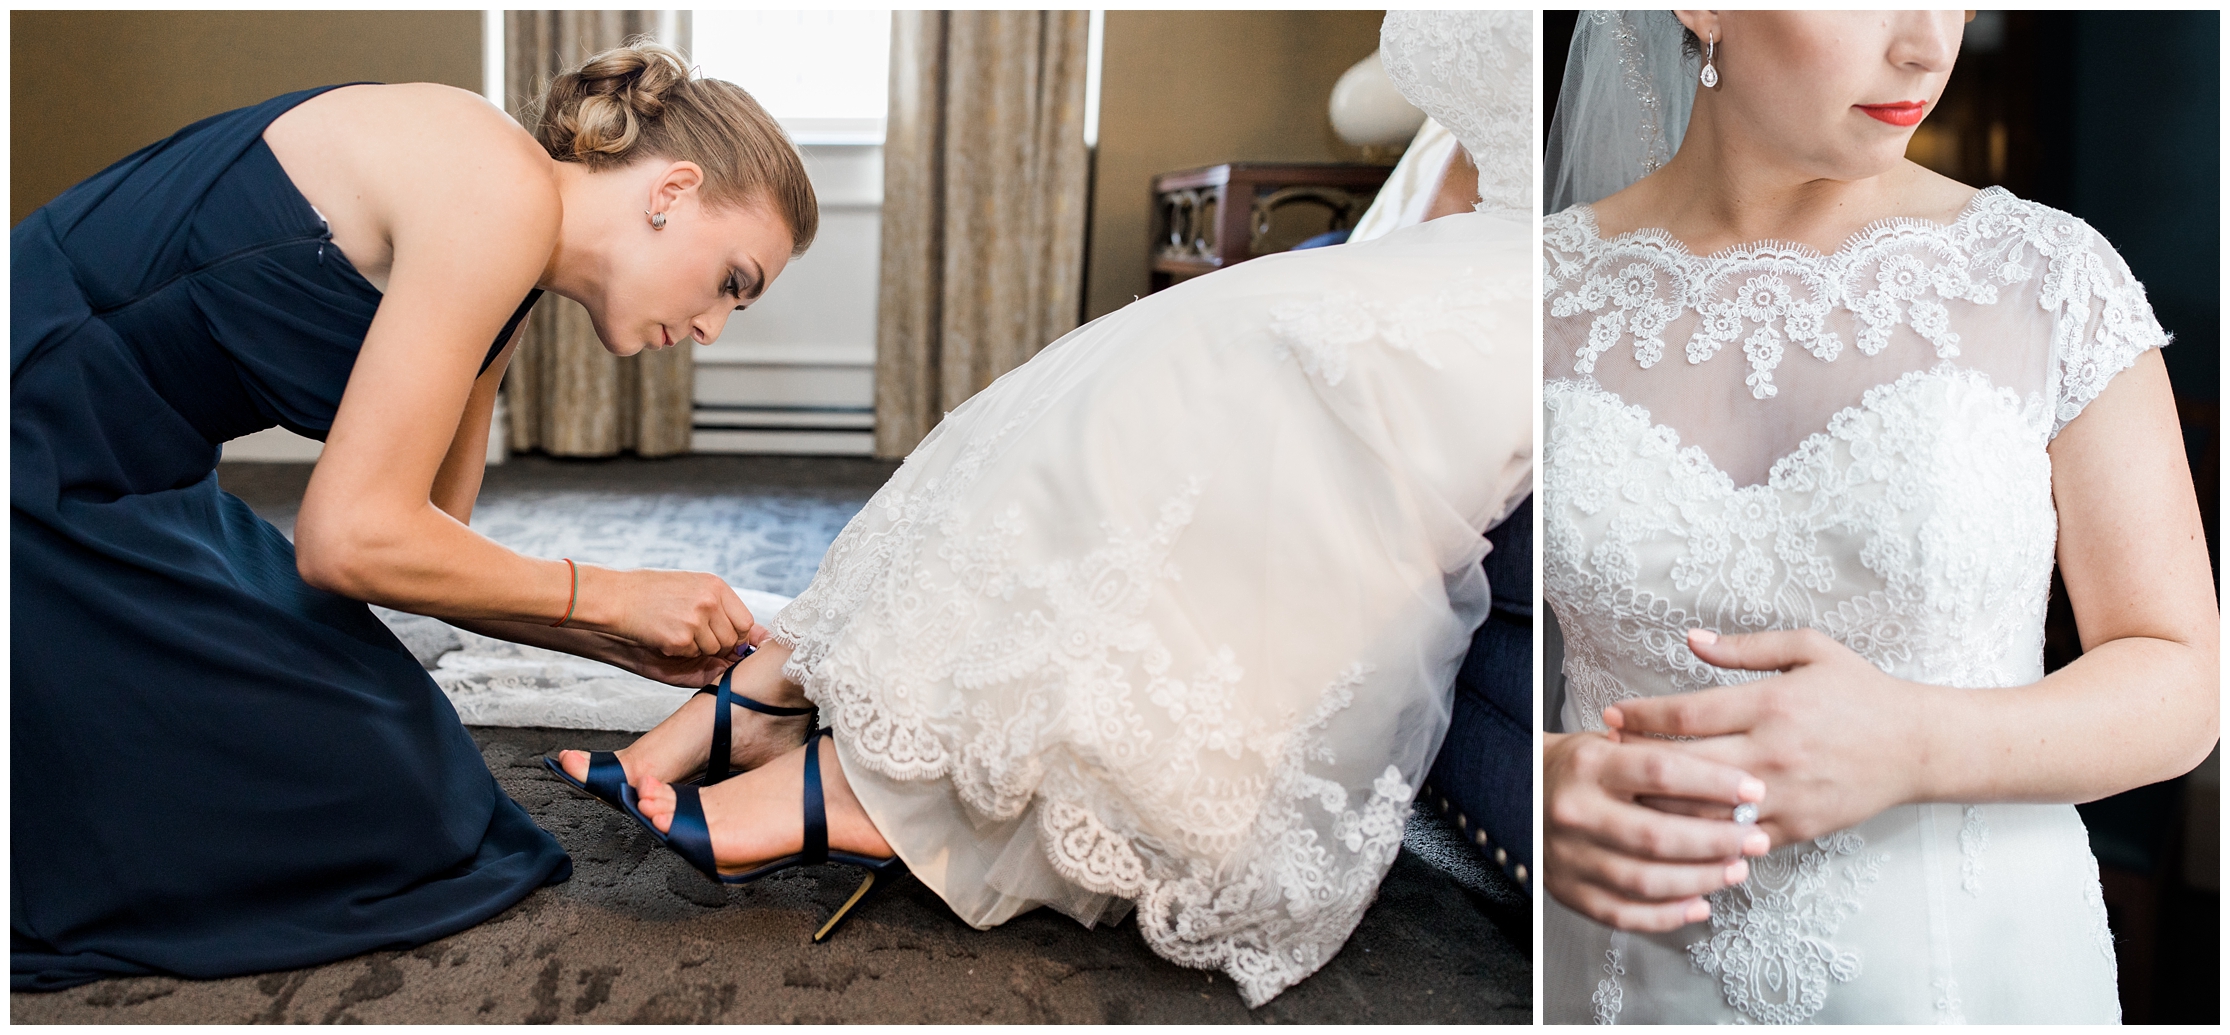 Audrey Brooke Blue Wedding Shoes, bride getting dressed, button up lace wedding gown, bridal party getting ready, Pittsburgh Hair and Makeup, Wedding bands, wedding day details, pittsburgh wedding details, pittsburgh wedding photographer,